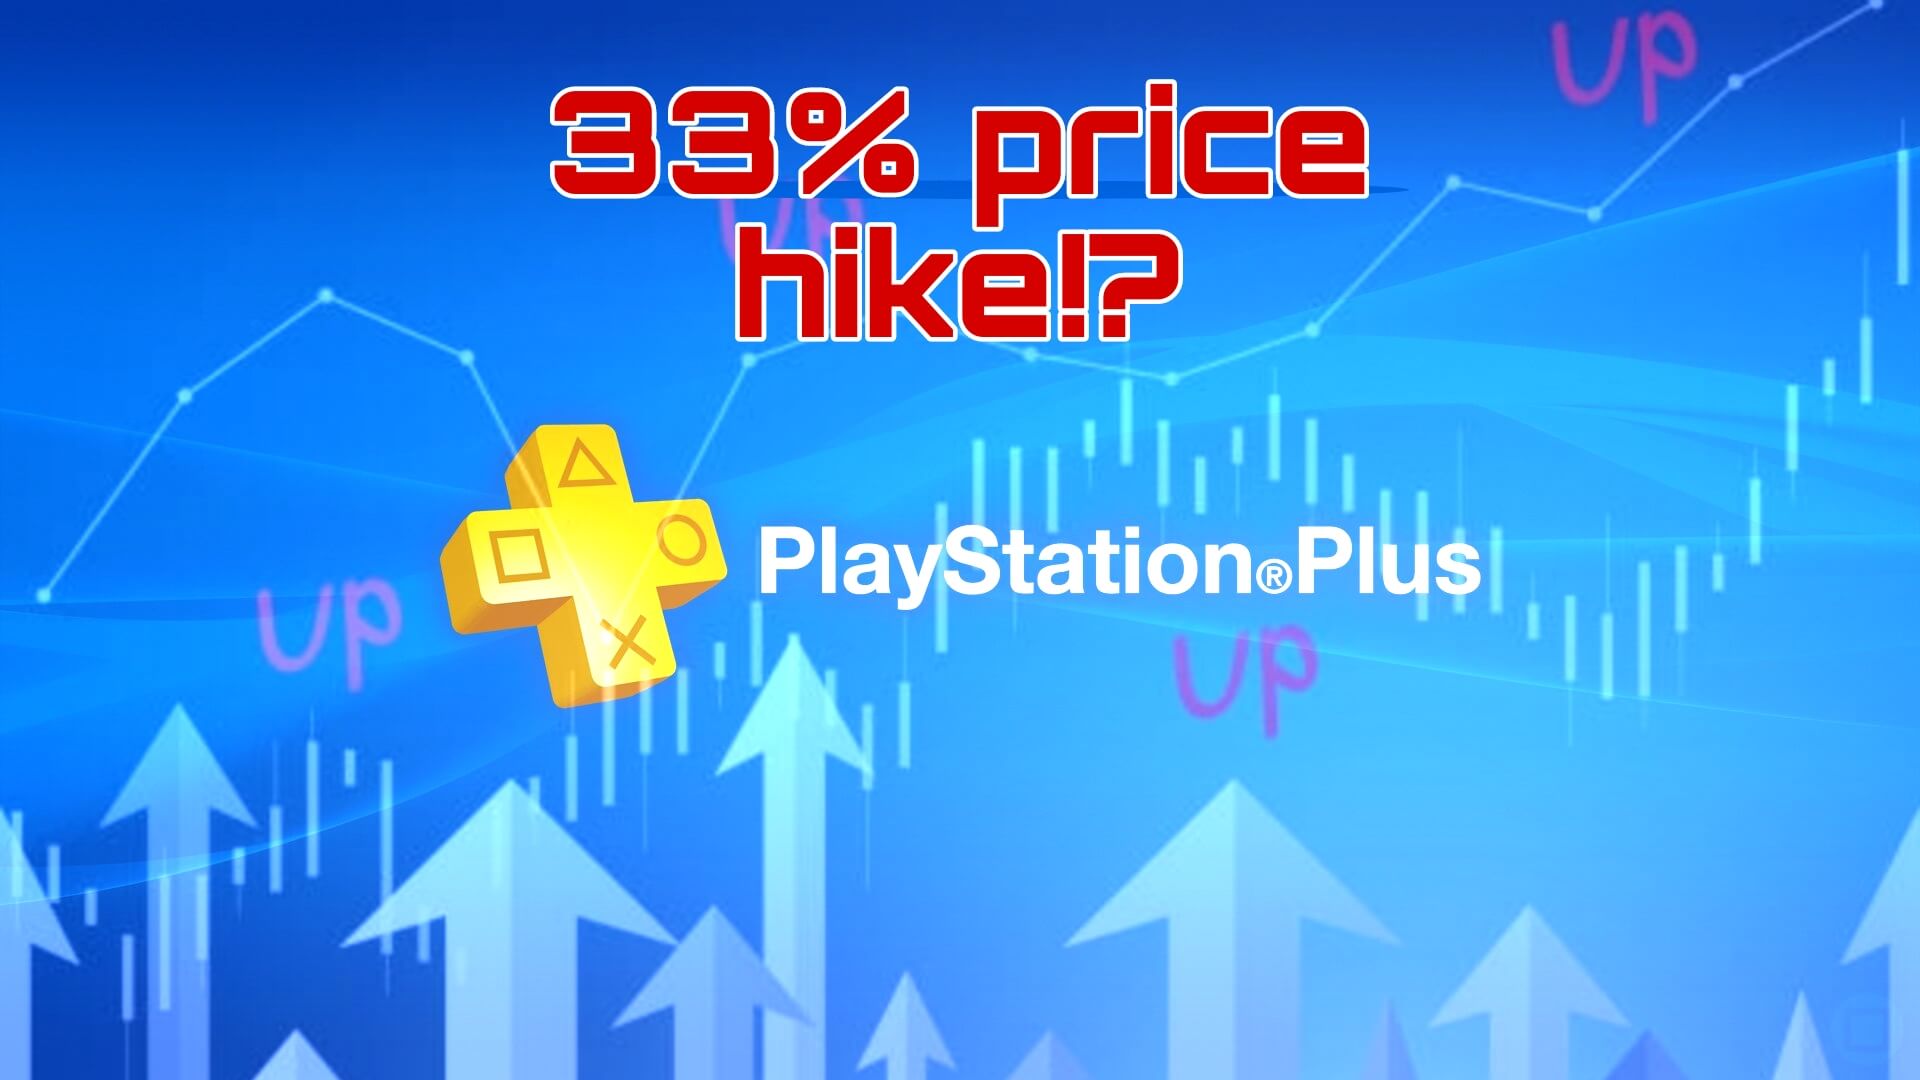 Wario64 on X: PlayStation Plus price has increased 12-months: Essential -  $79.99 Extra - $134.99 Premium - $159.99    / X